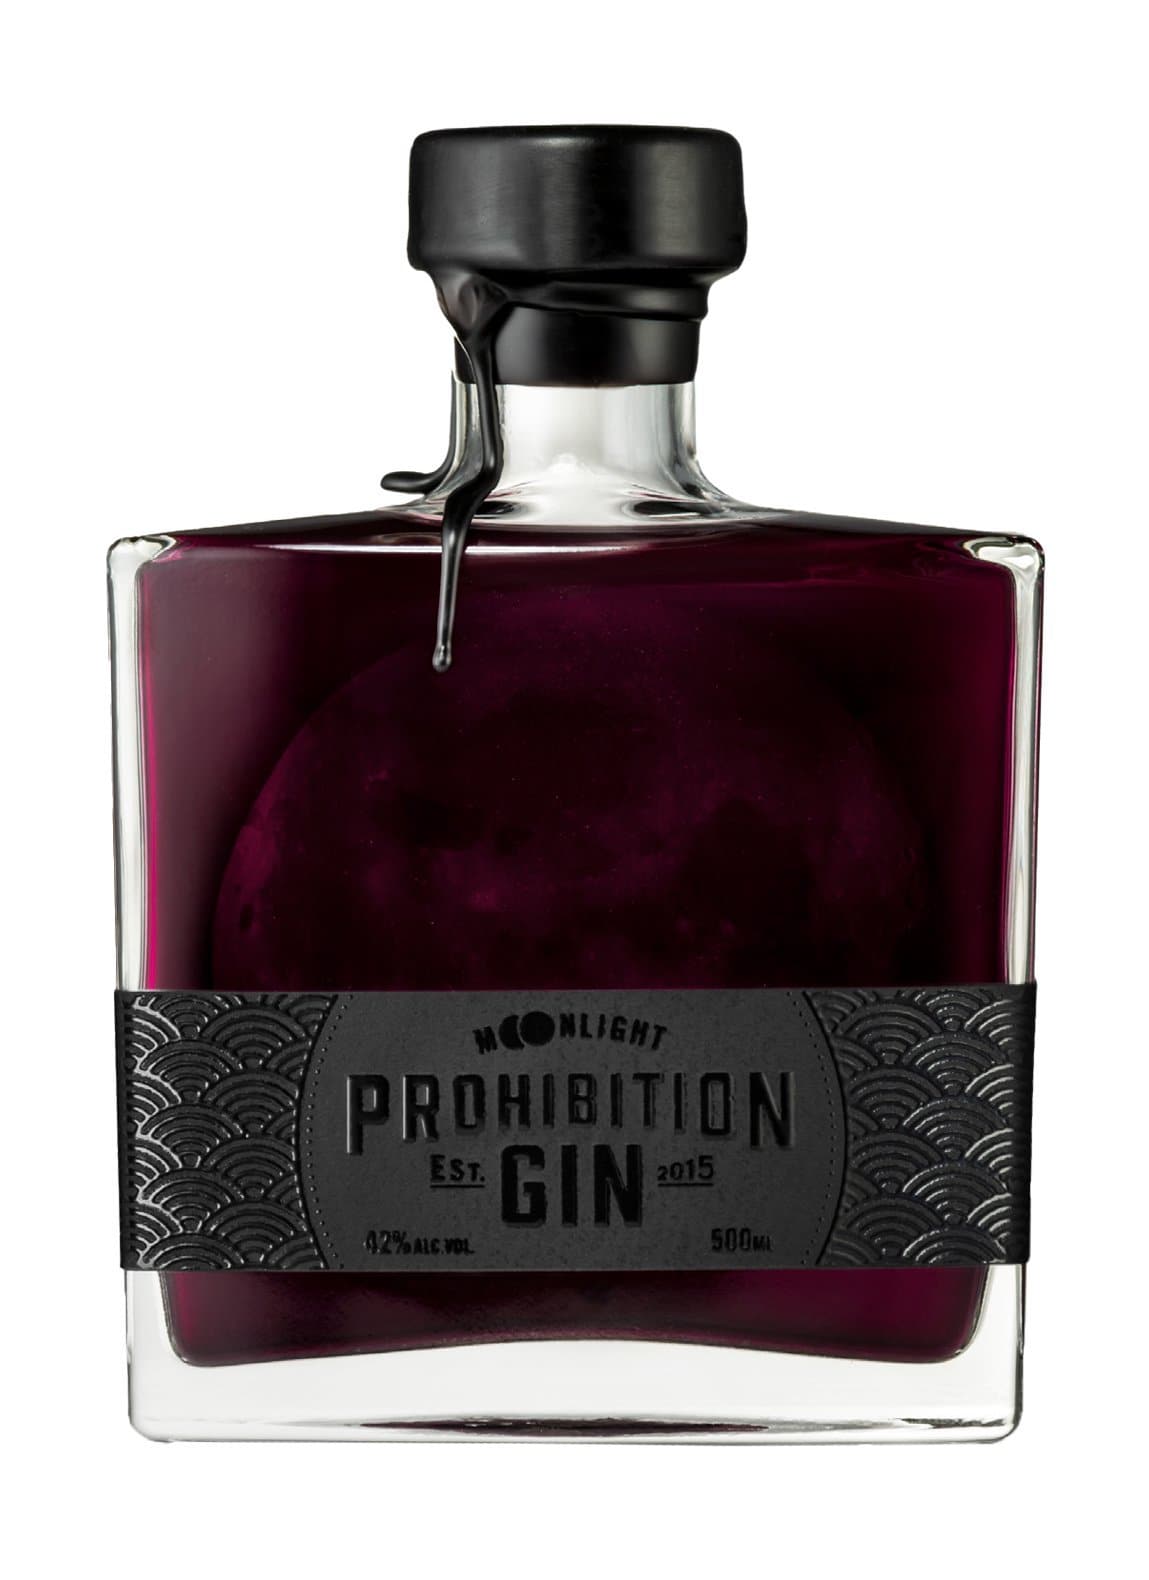 Prohibition Moonlight Gin 42% 500ml | Gin | Shop online at Spirits of France